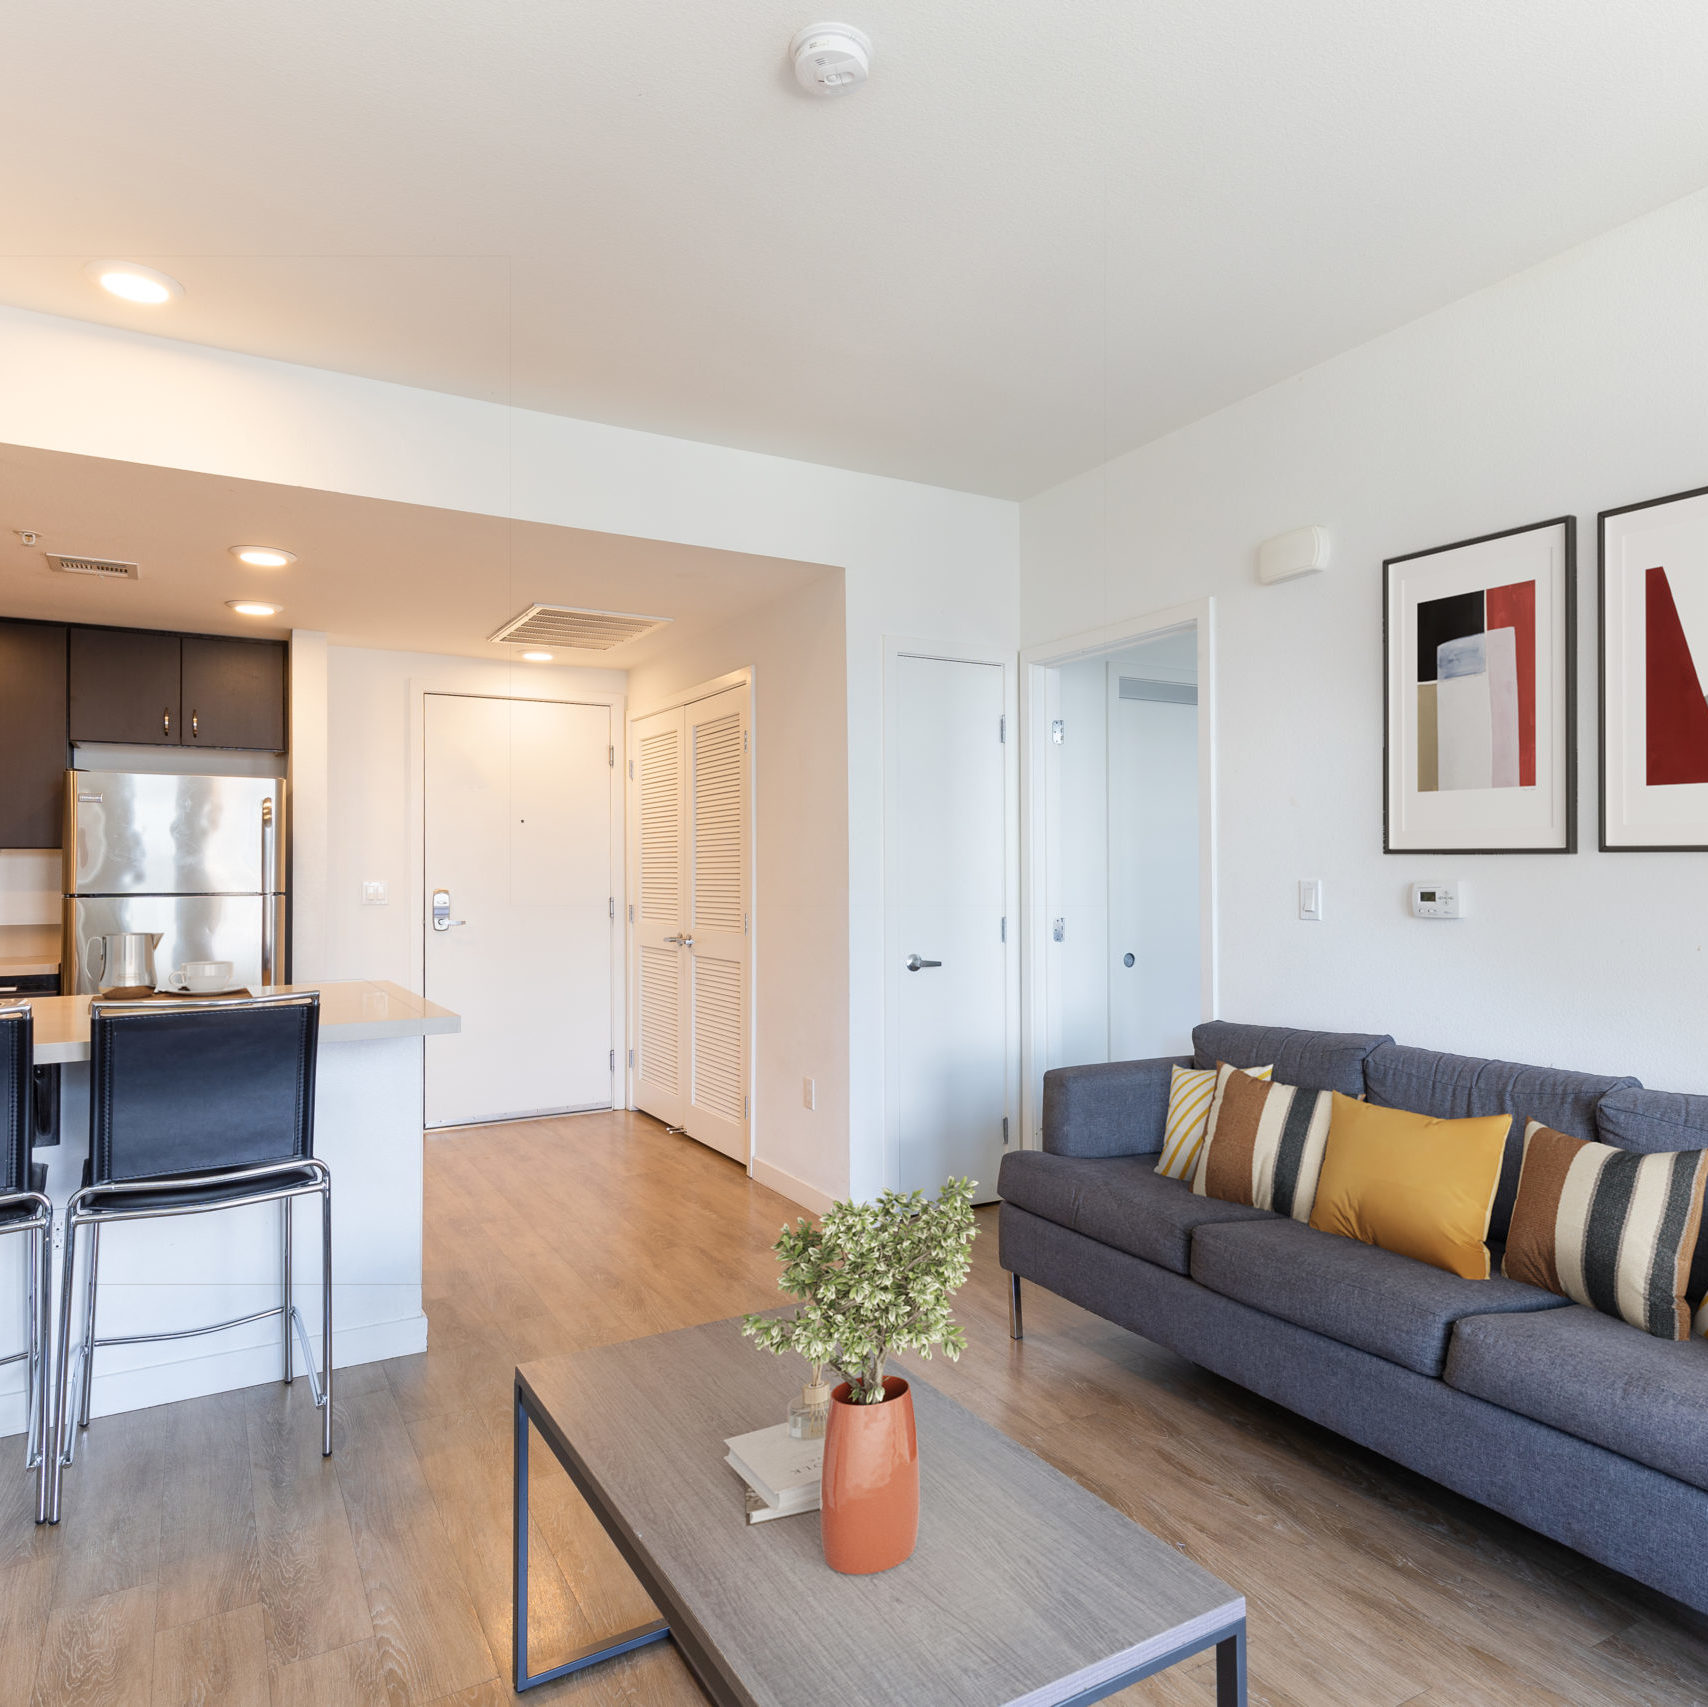 27 North - Fully-Furnished Apartments